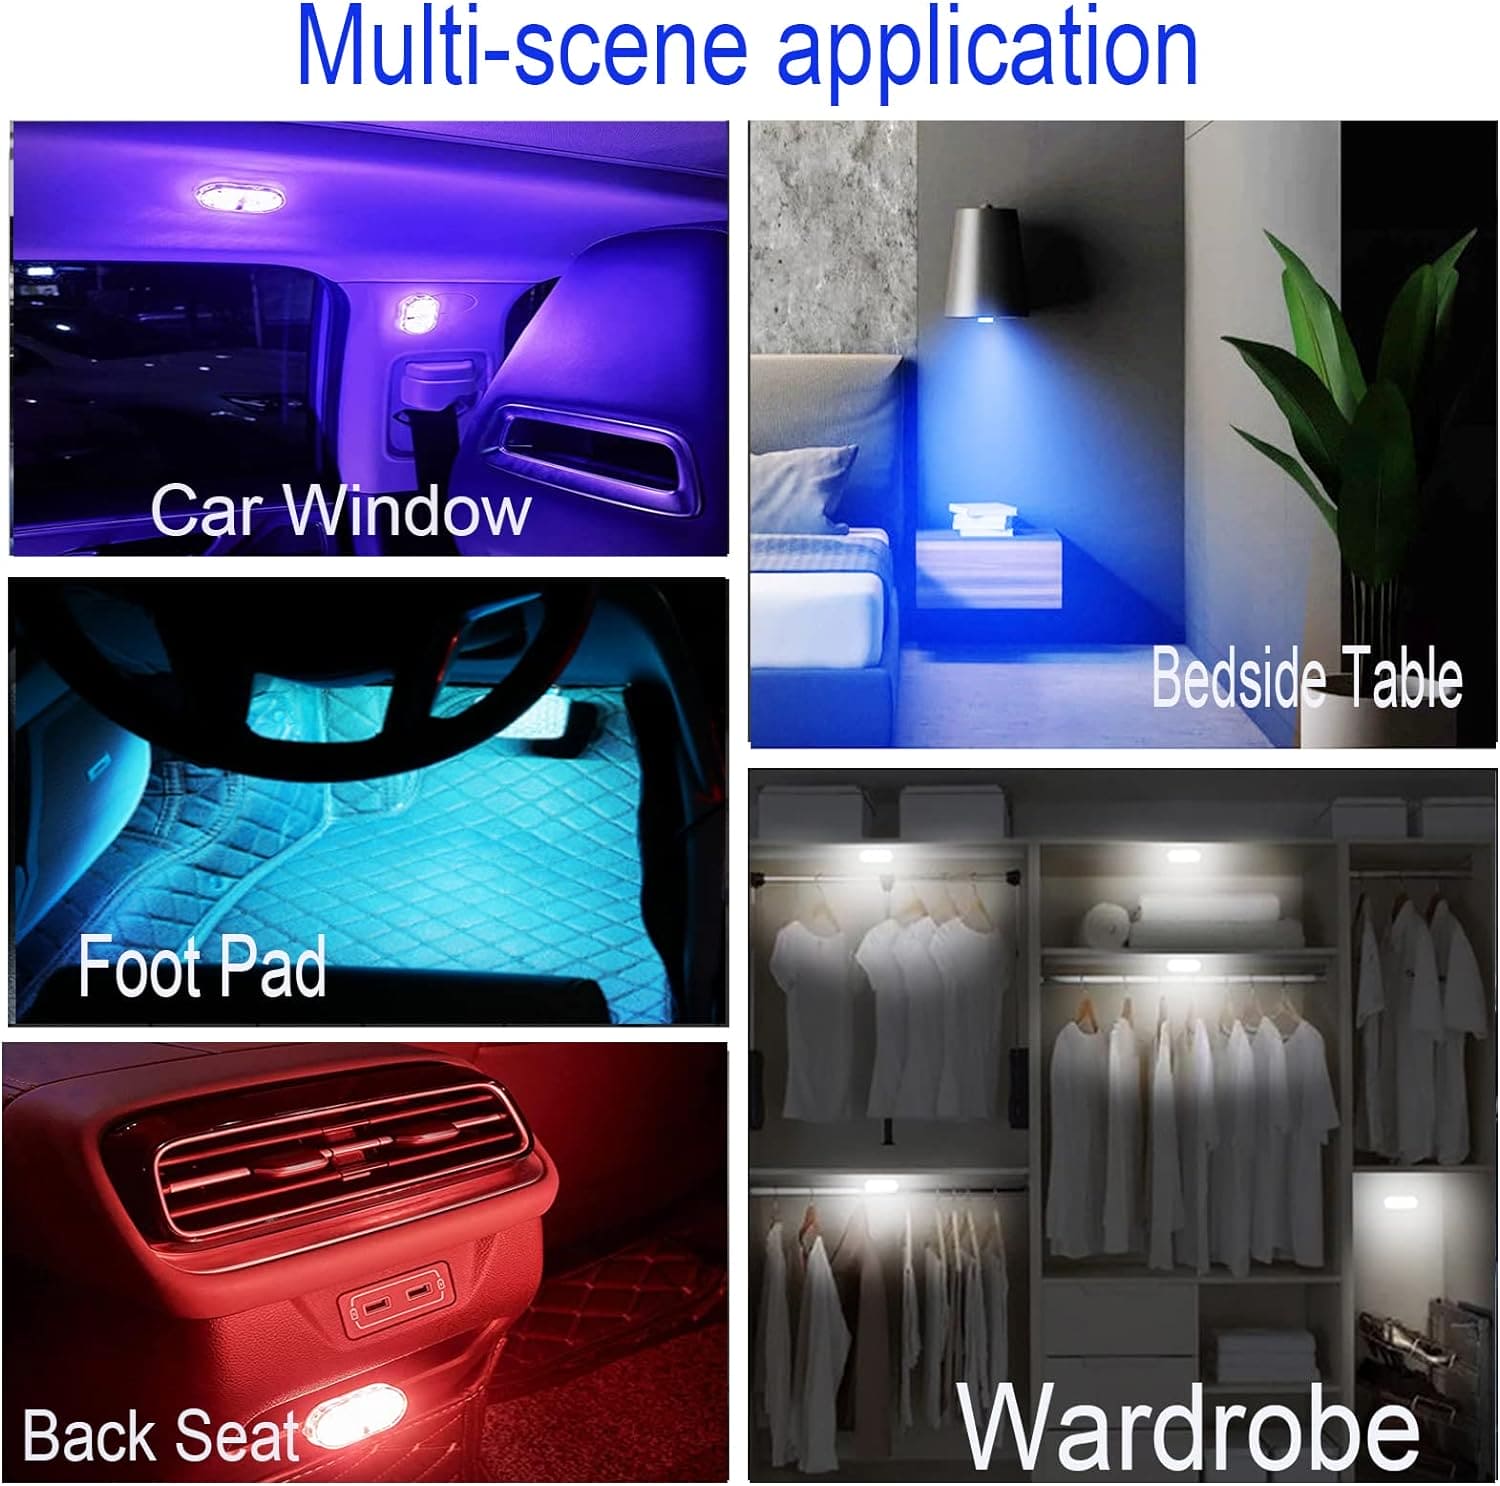 LED Car Interior Lighting, Finger Touch Sensor Reading Lamp, ,7 Colors LED Interior Car Lights, Wireless Magnetic Welcome Cars Lamp, Auto Roof Ceiling Reading Lamp, LED Car Styling Night Light Mini USB Charging Car Light